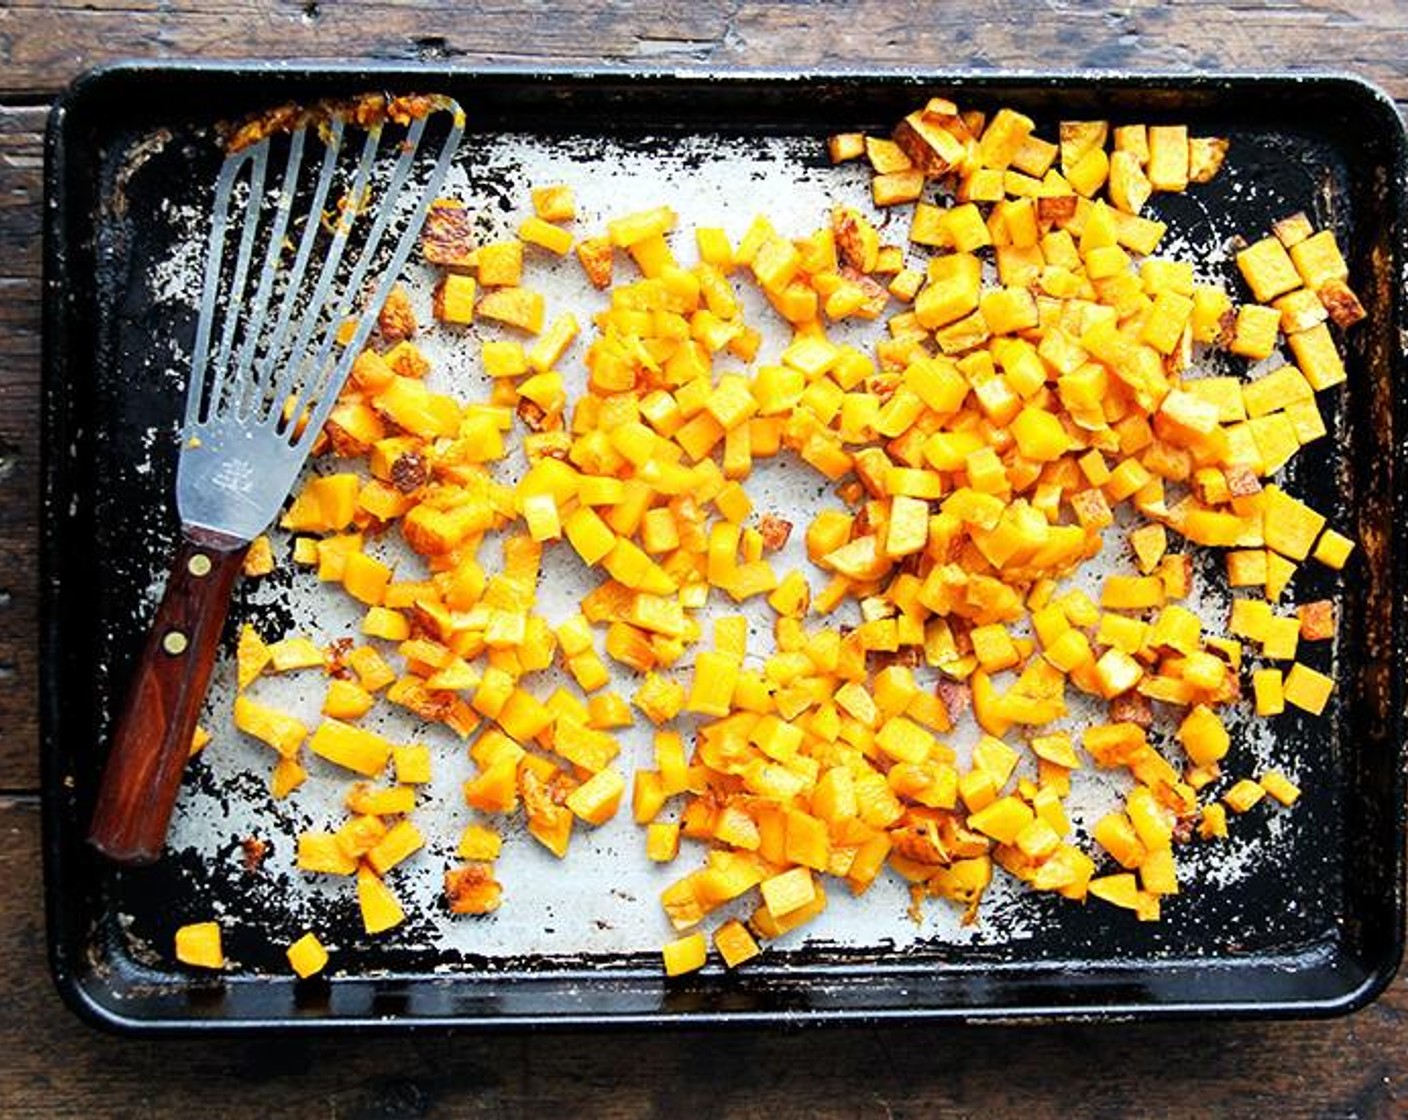 step 2 Spread Butternut Squash (9 3/4 cups) on each sheet pan and toss with Vegetable Oil (1 Tbsp) until coated well. Add additional tablespoon of oil if necessary.